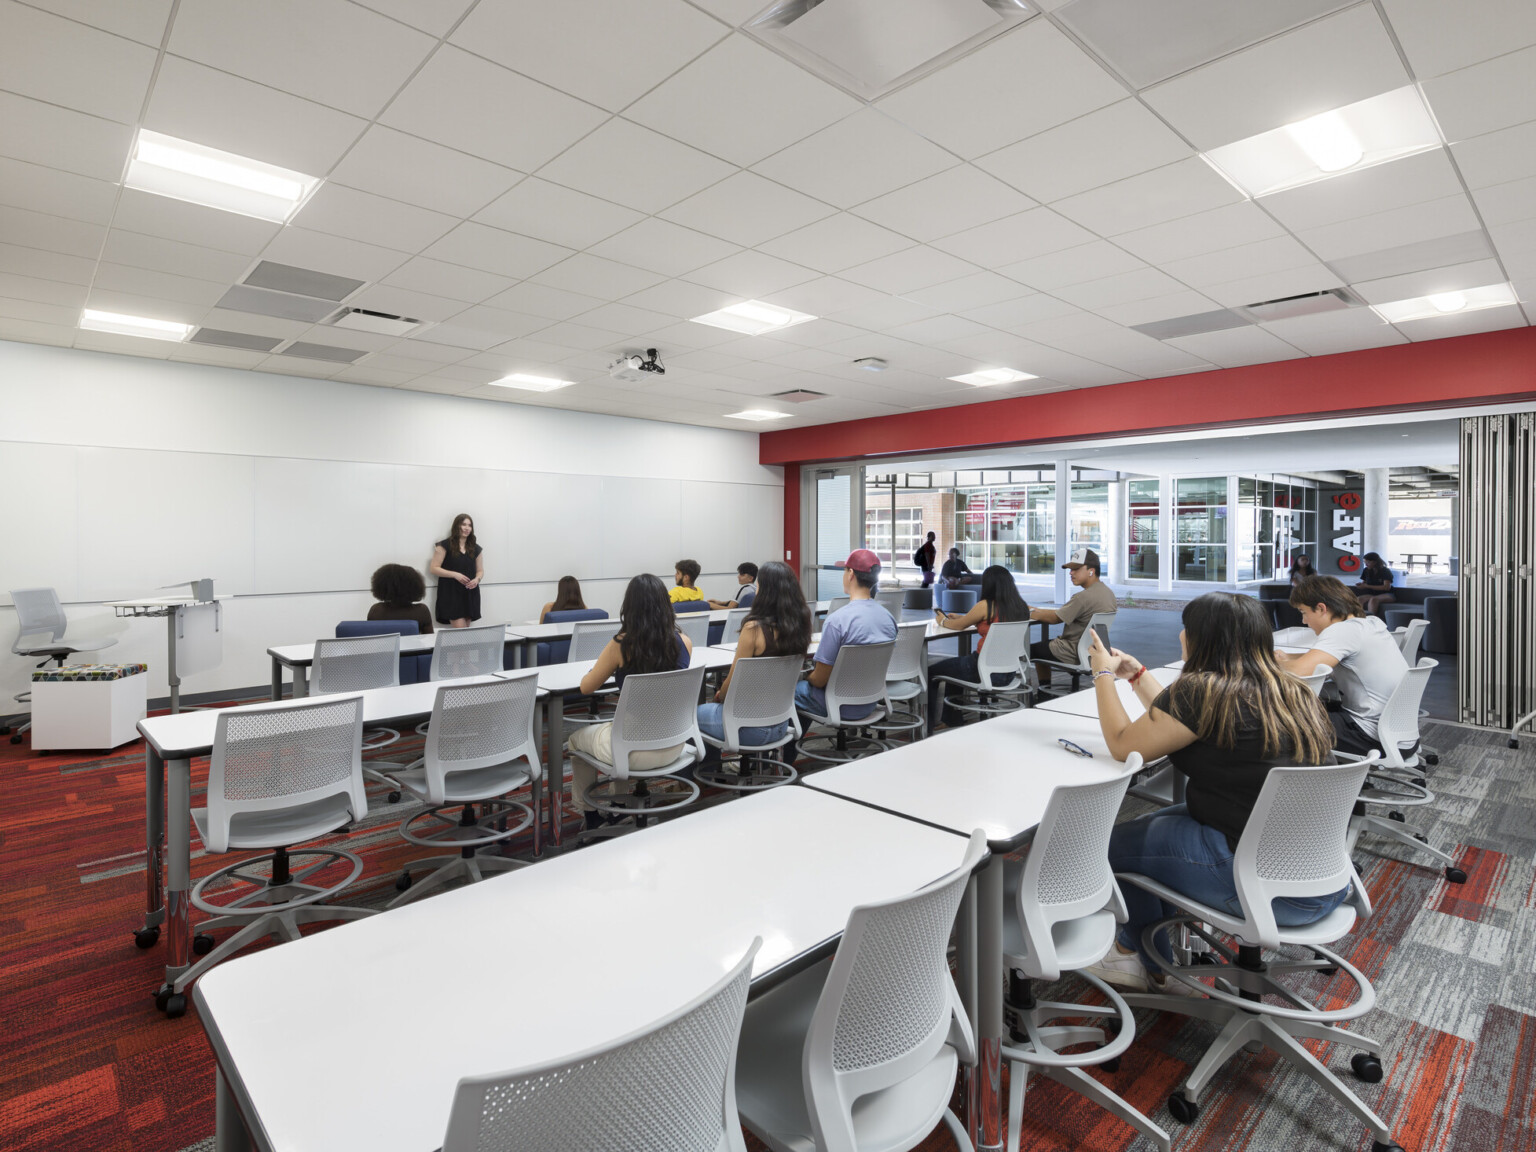 classroom with students in various seating areas, instructor, overhead edison pendant lights, red geometric carpeting, red accent wall, glass partition between two classrooms invite collaboration